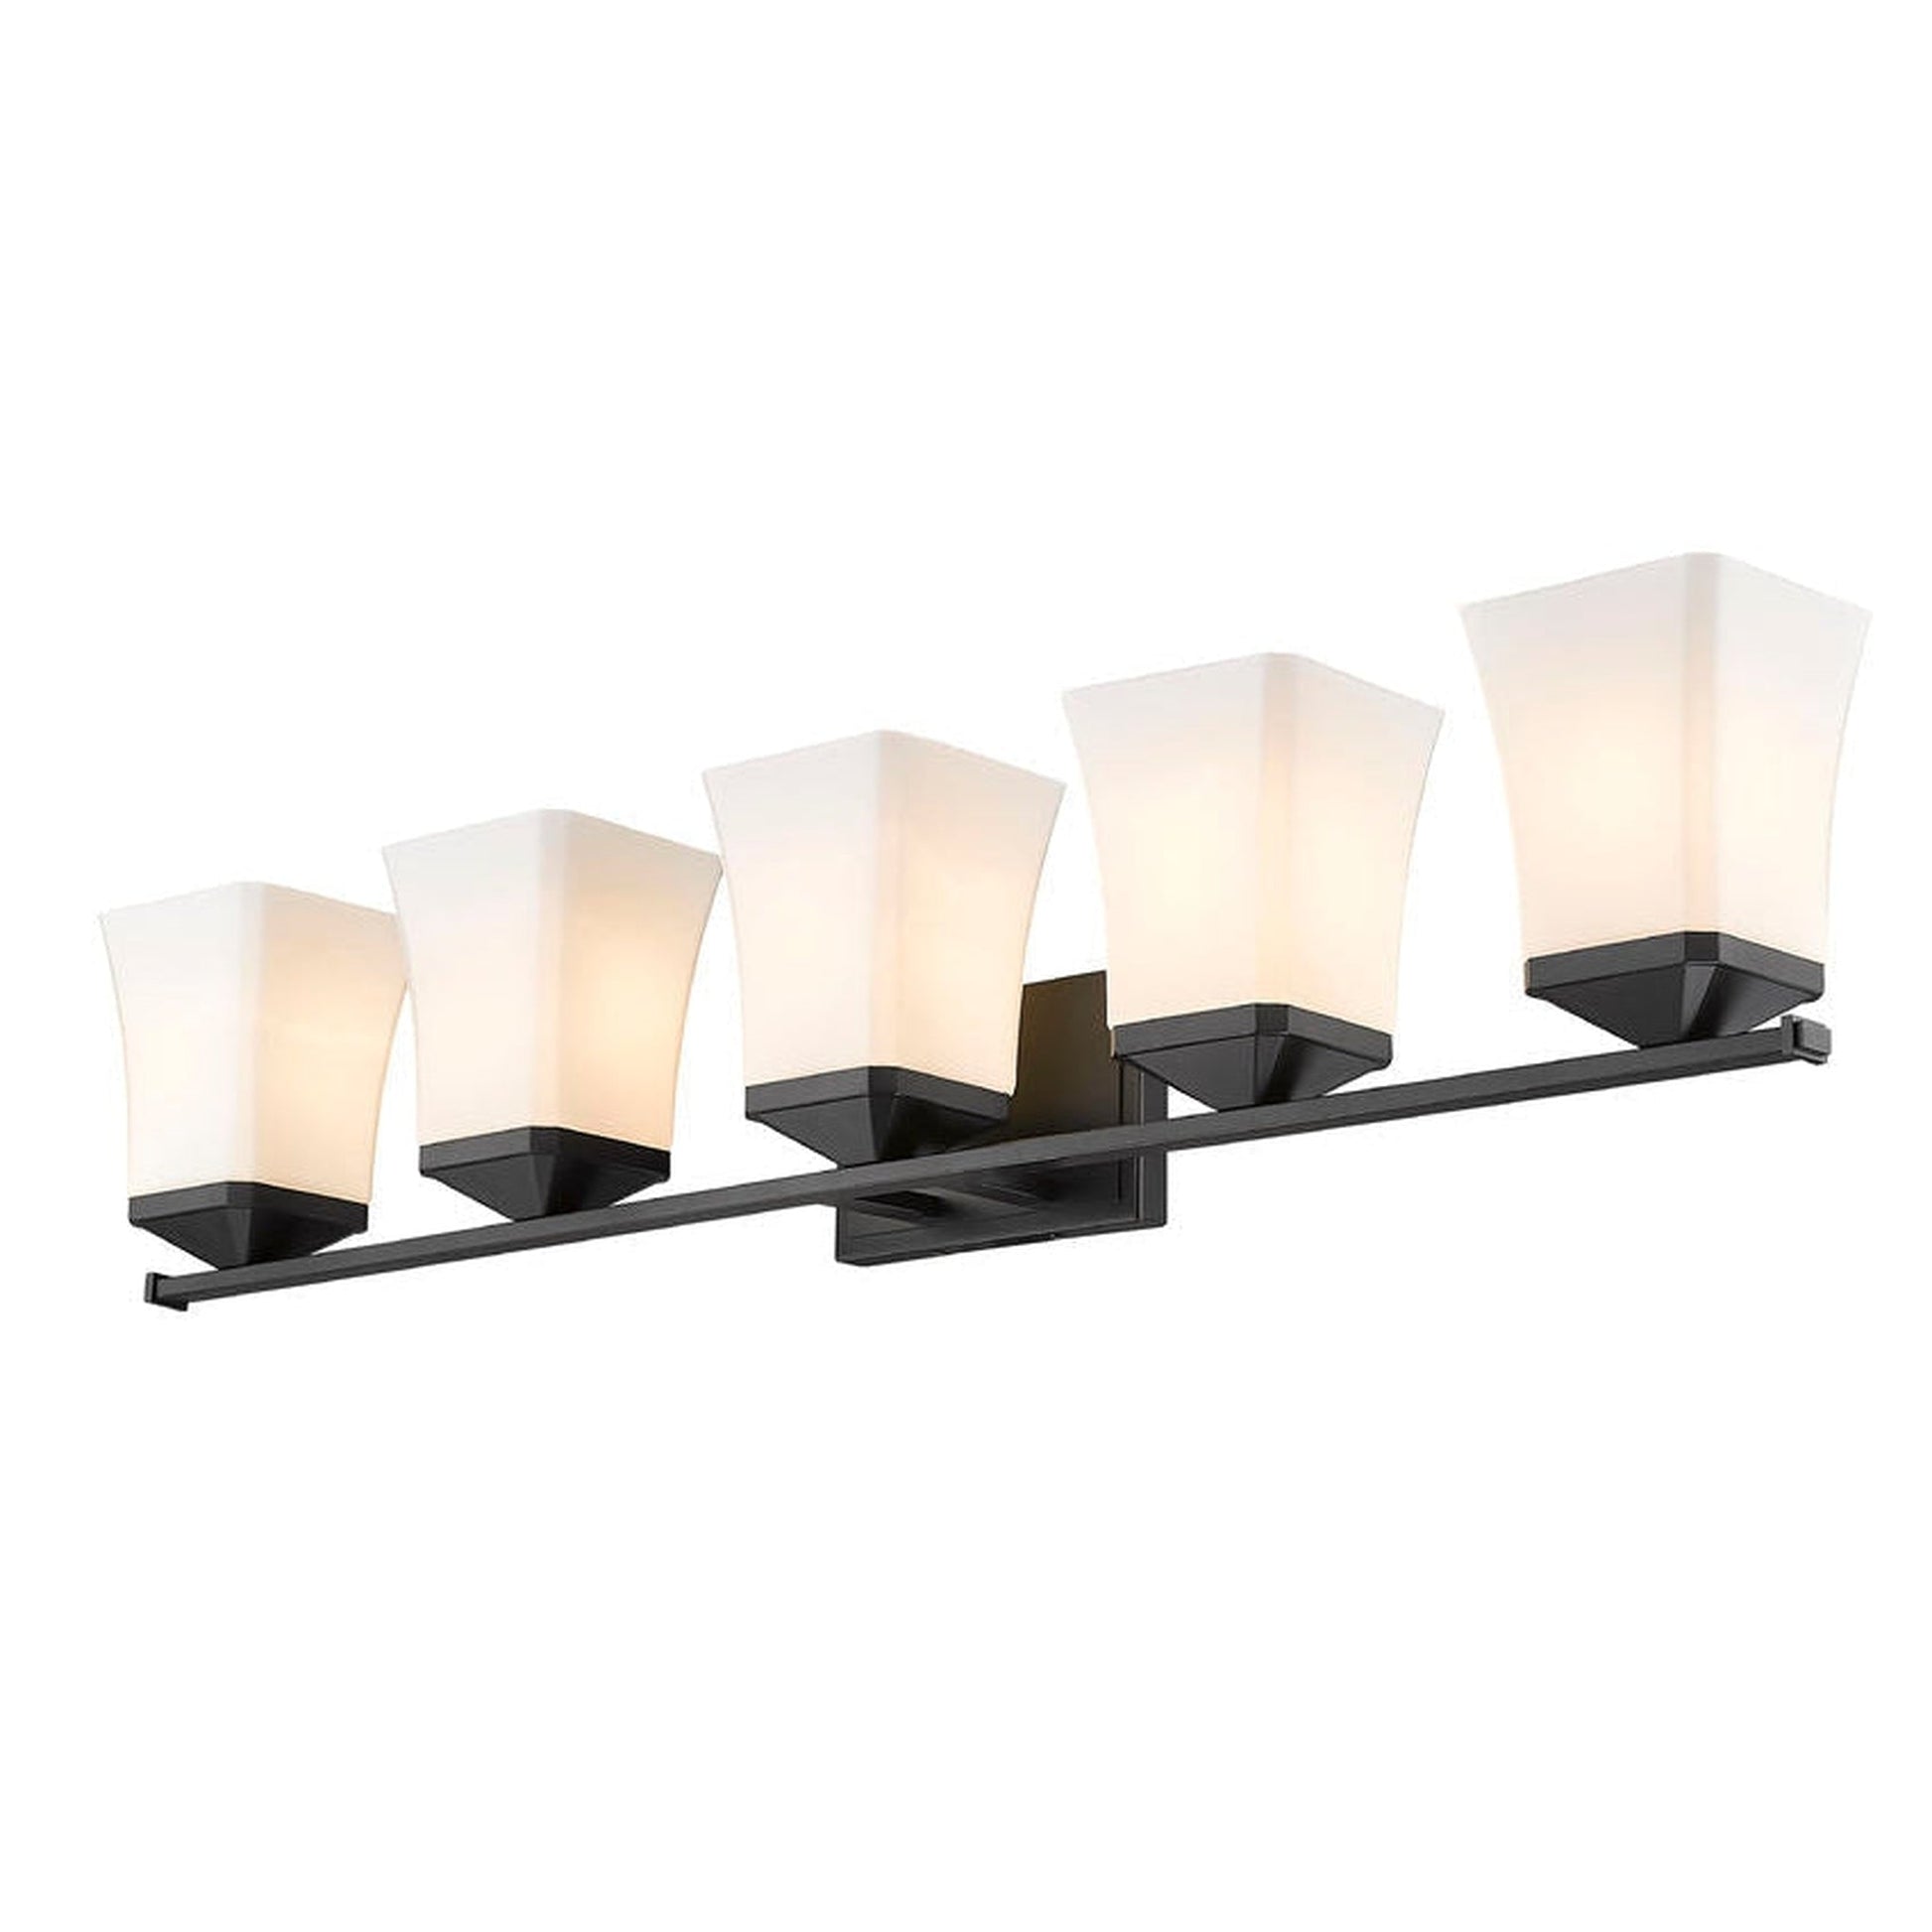 Z-Lite Darcy 38" 5-Light Matte Black Vanity Light With Etched Opal Glass Shade